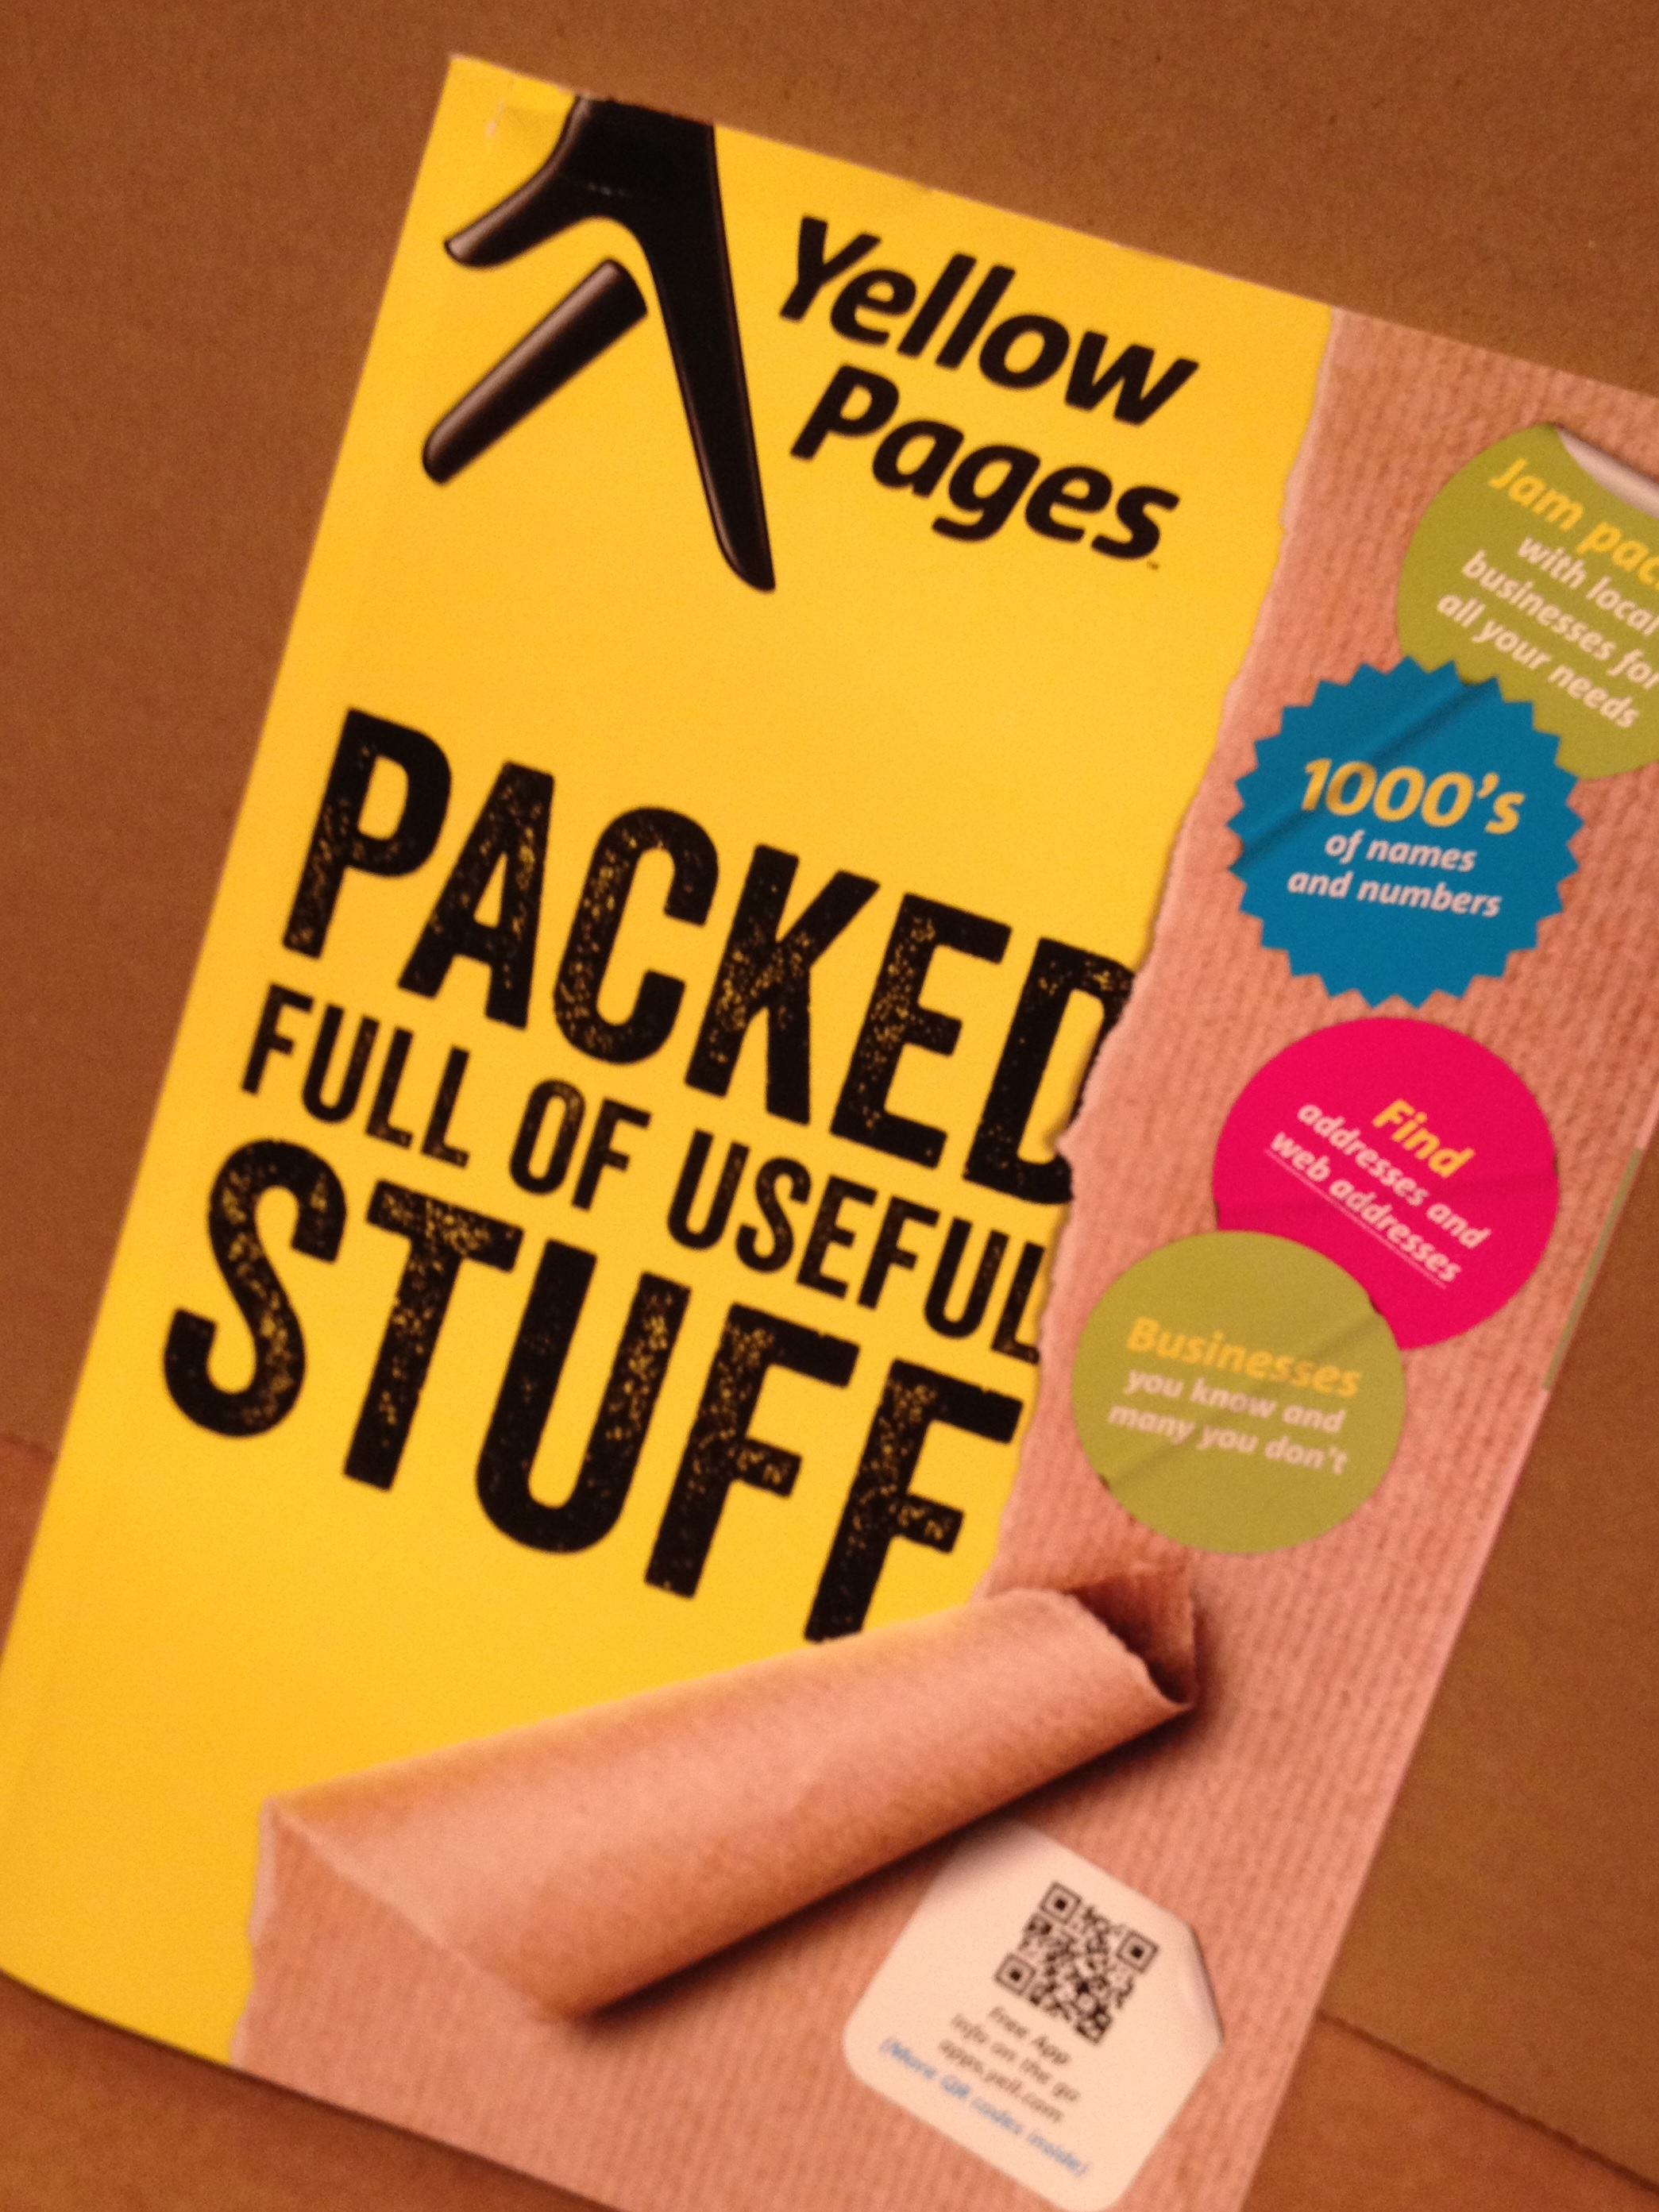 Does Anyone Use Yellow Pages Anymore, or Should We Shout About Yell ...